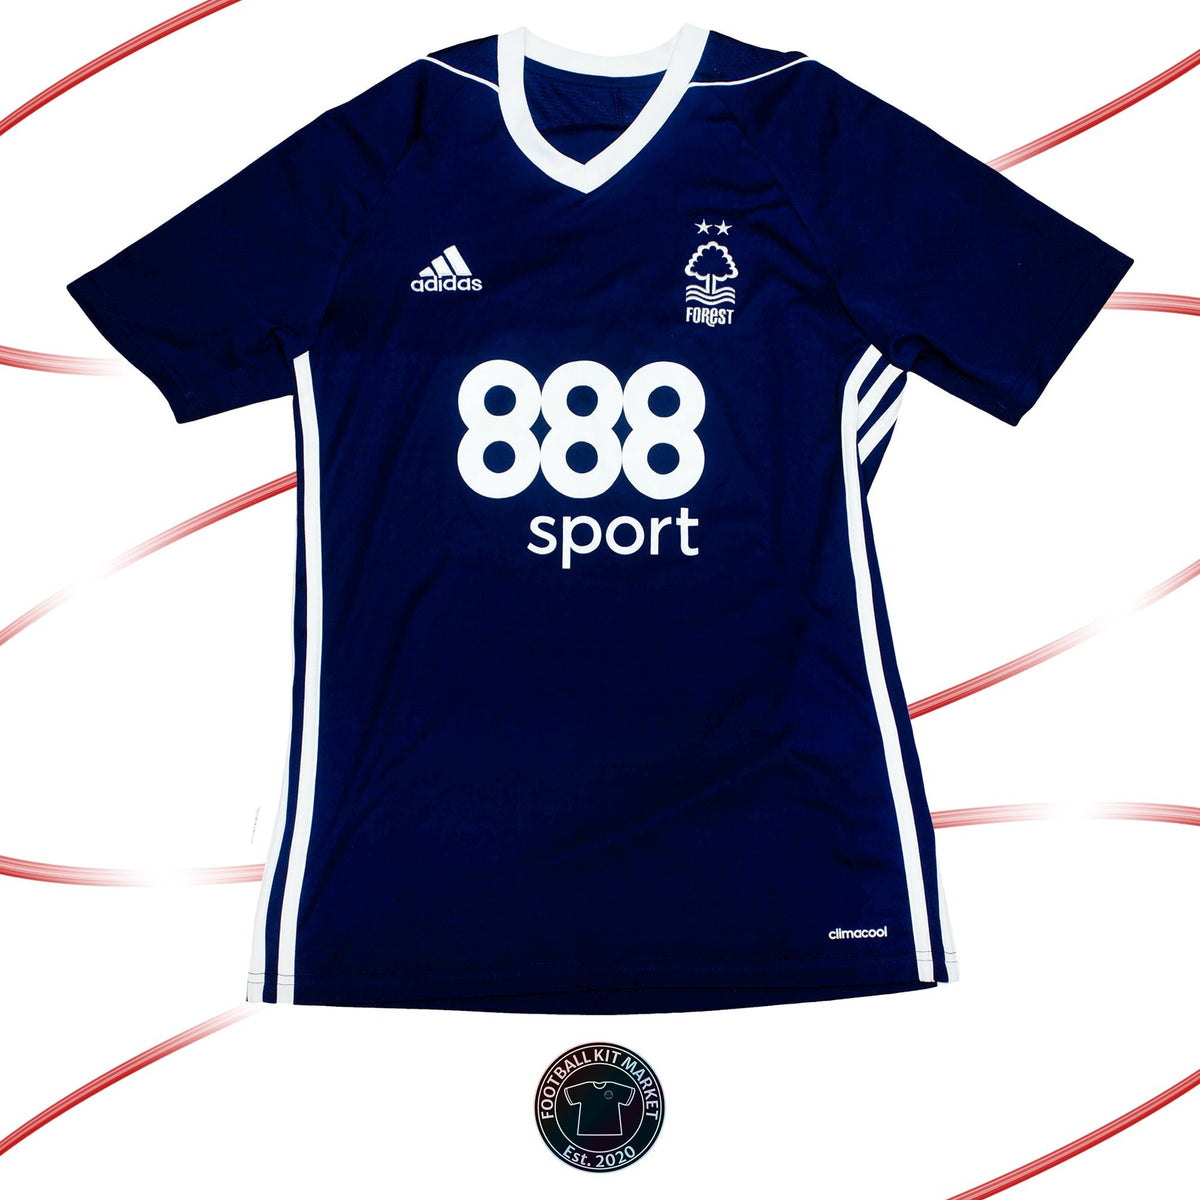 Genuine NOTTINGHAM FOREST Away Shirt (2017-2018) - ADIDAS (S) - Product Image from Football Kit Market